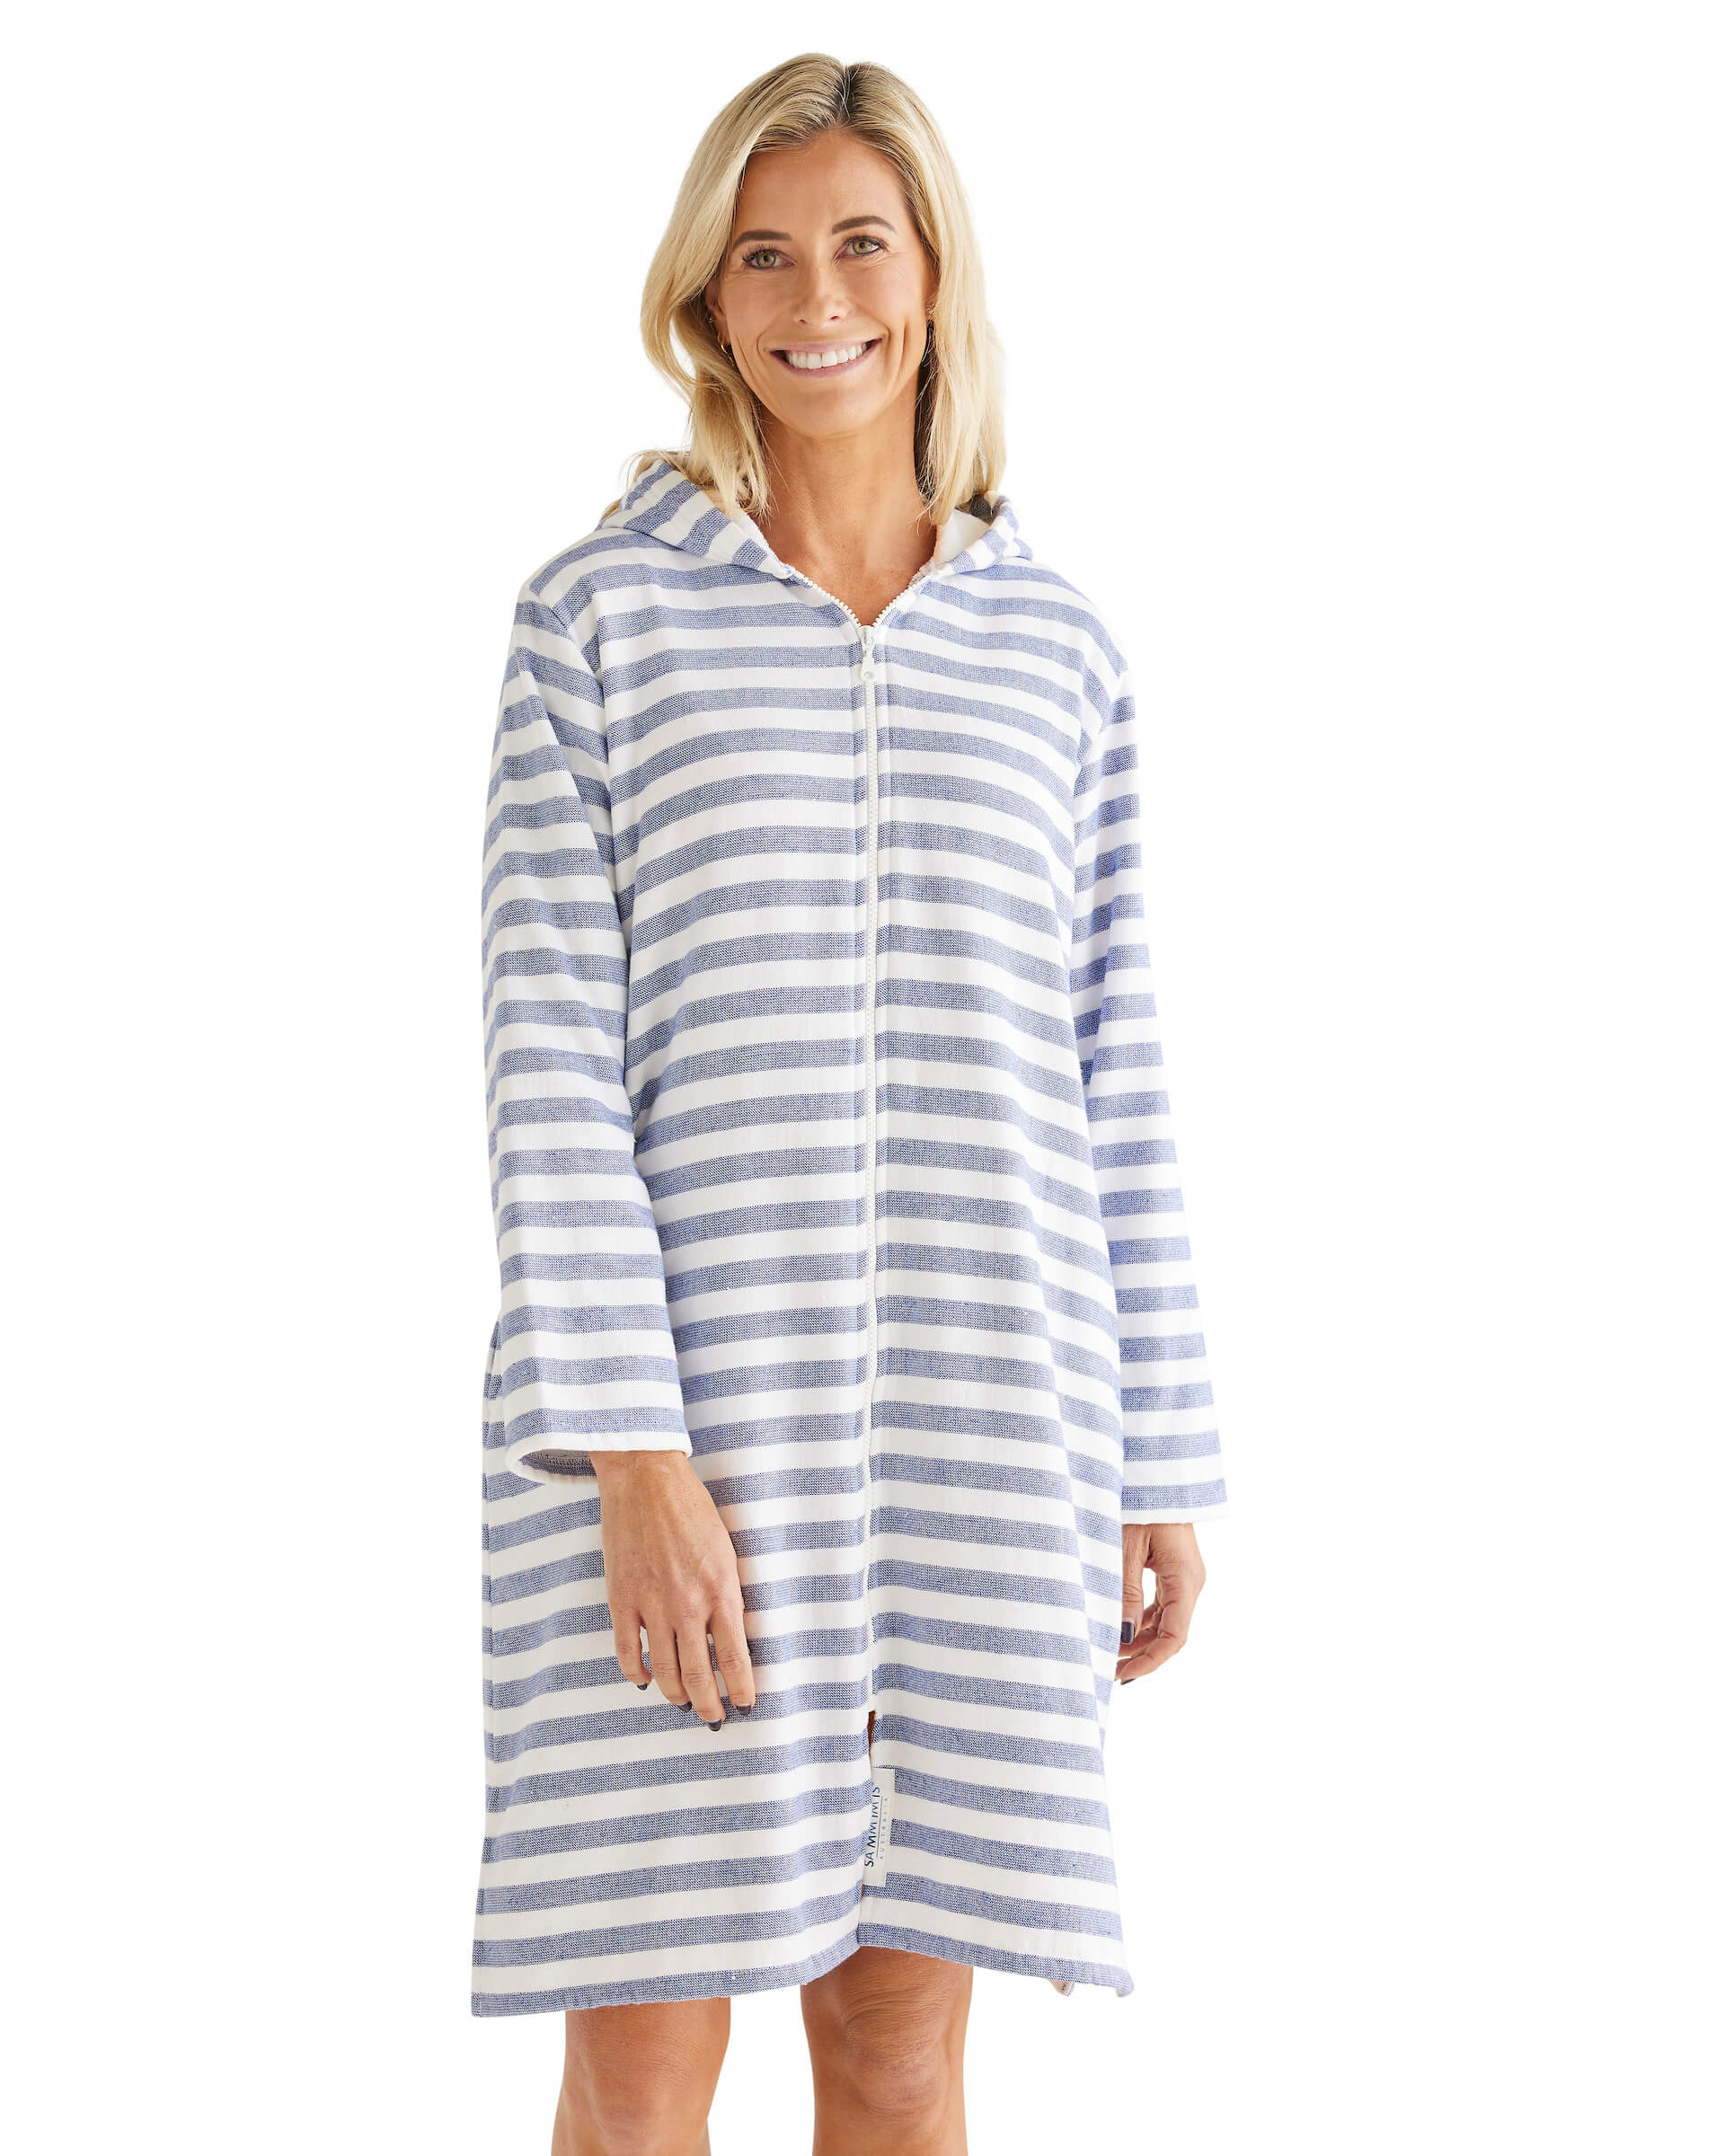 POSITANO Adult Terry Hooded Towel: Navy/White